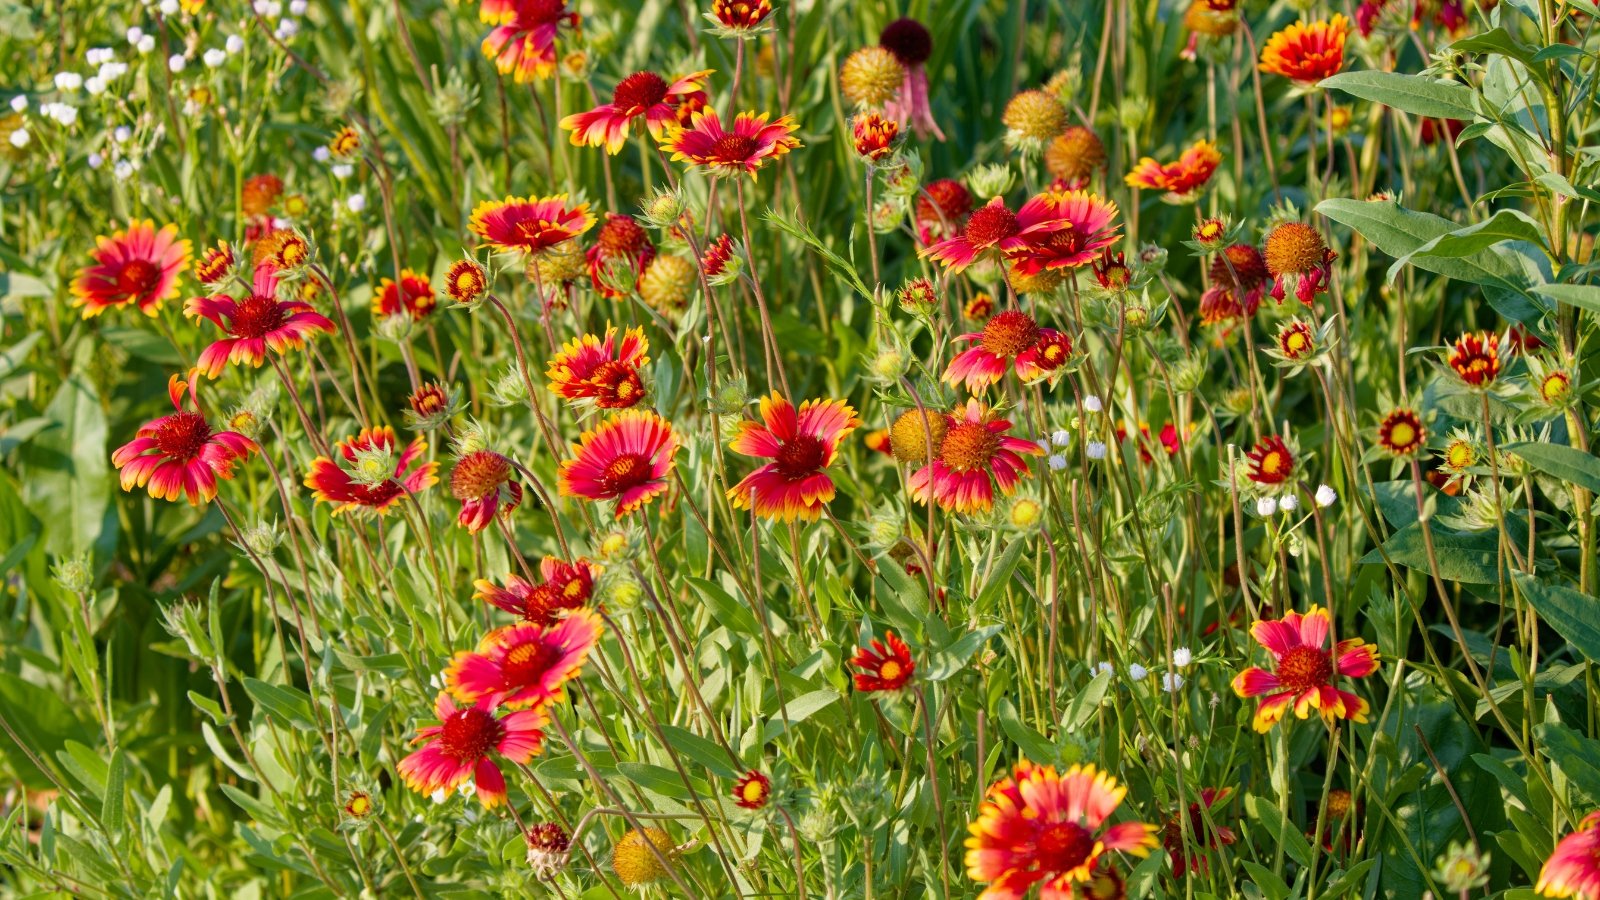 Gaillardia exhibits sturdy stems and lance-shaped leaves, with striking daisy-like flowers in vibrant hues of red, orange, and yellow.
